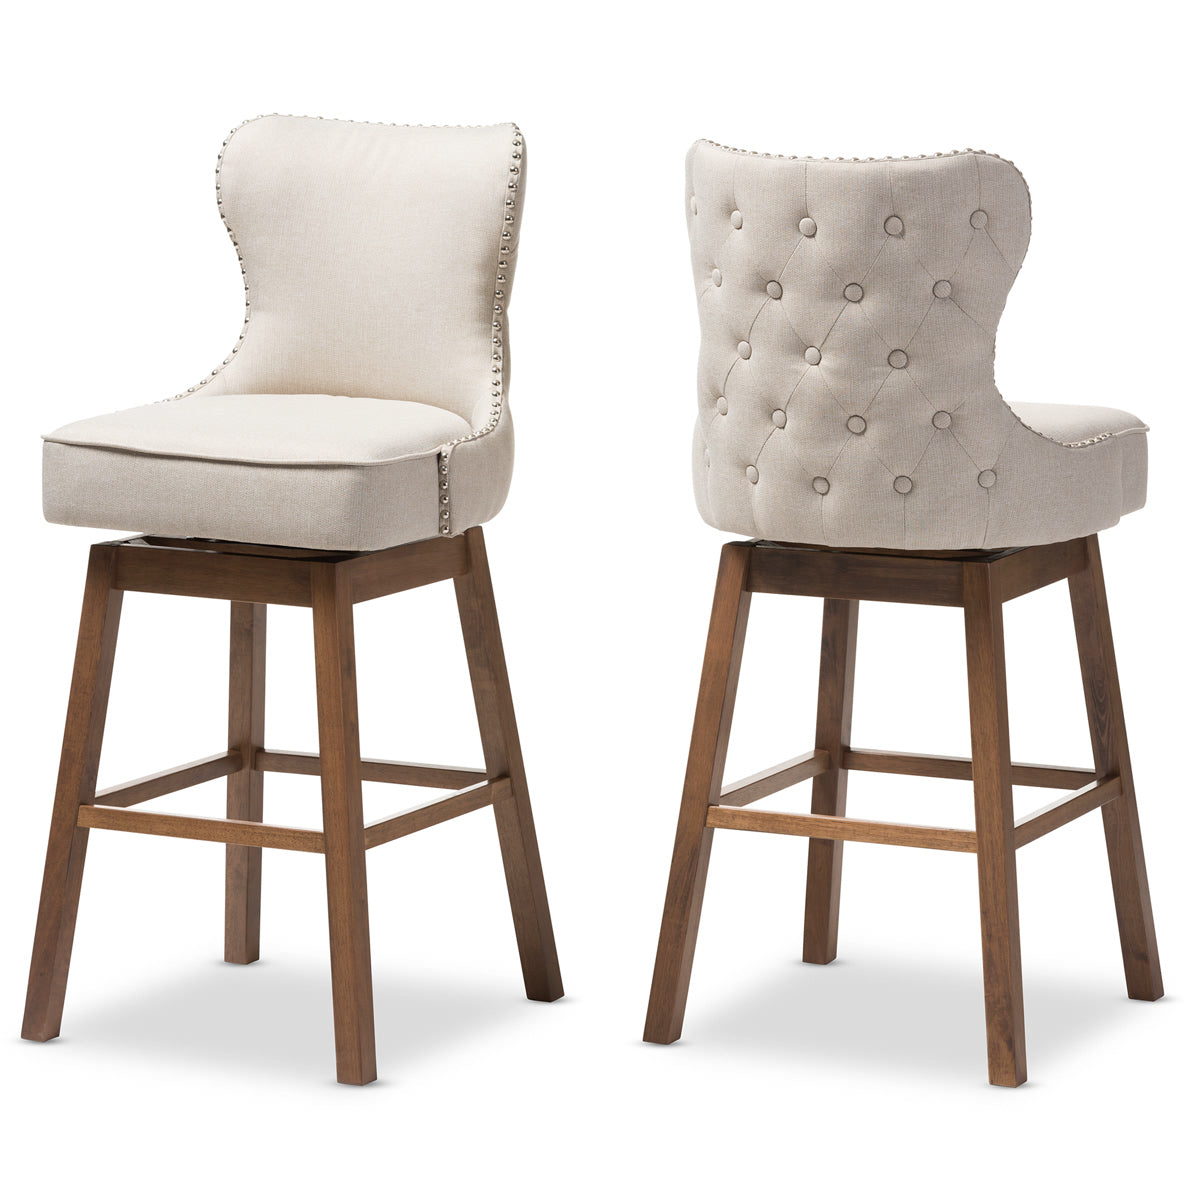 Baxton Studio Gradisca Modern and Contemporary Brown Wood Finishing and Light Beige Fabric Button-Tufted Upholstered Swivel Barstool Baxton Studio-Bar Stools-Minimal And Modern - 2